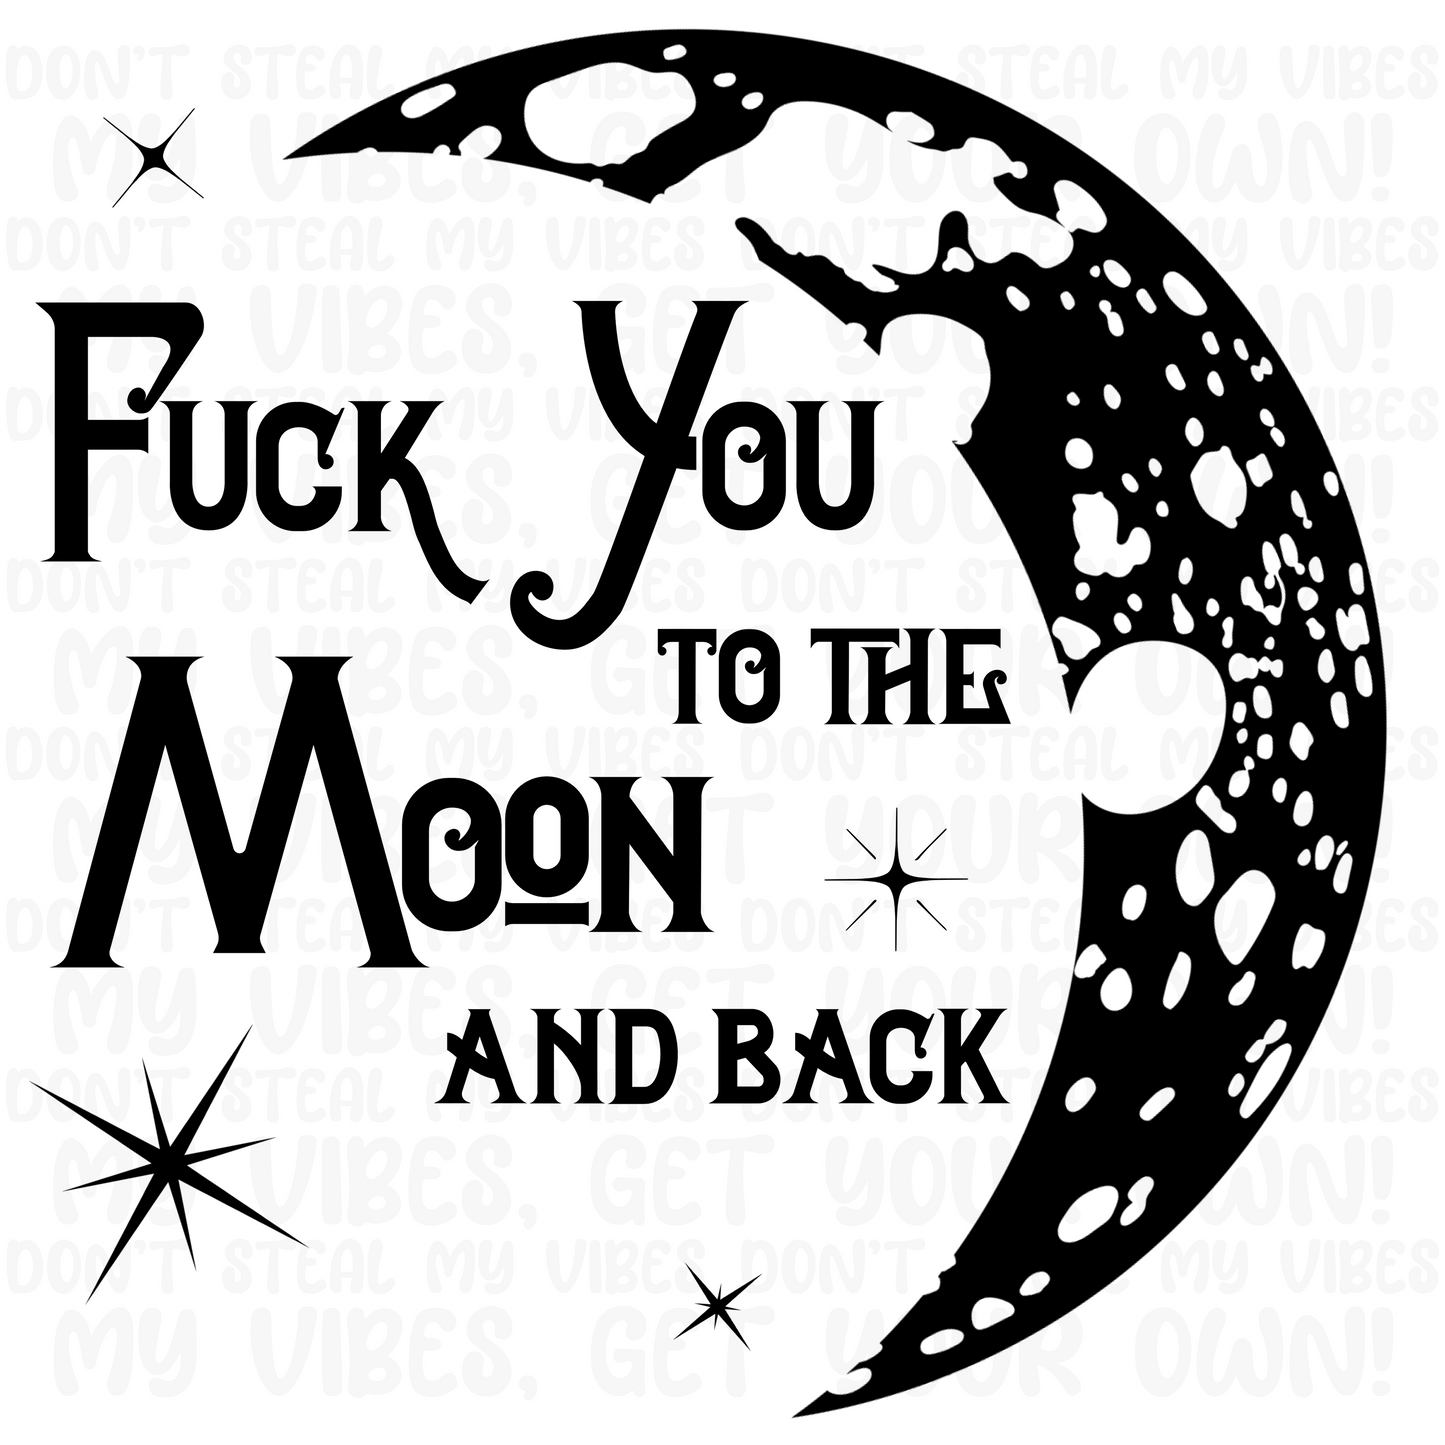 F*ck You to The Moon